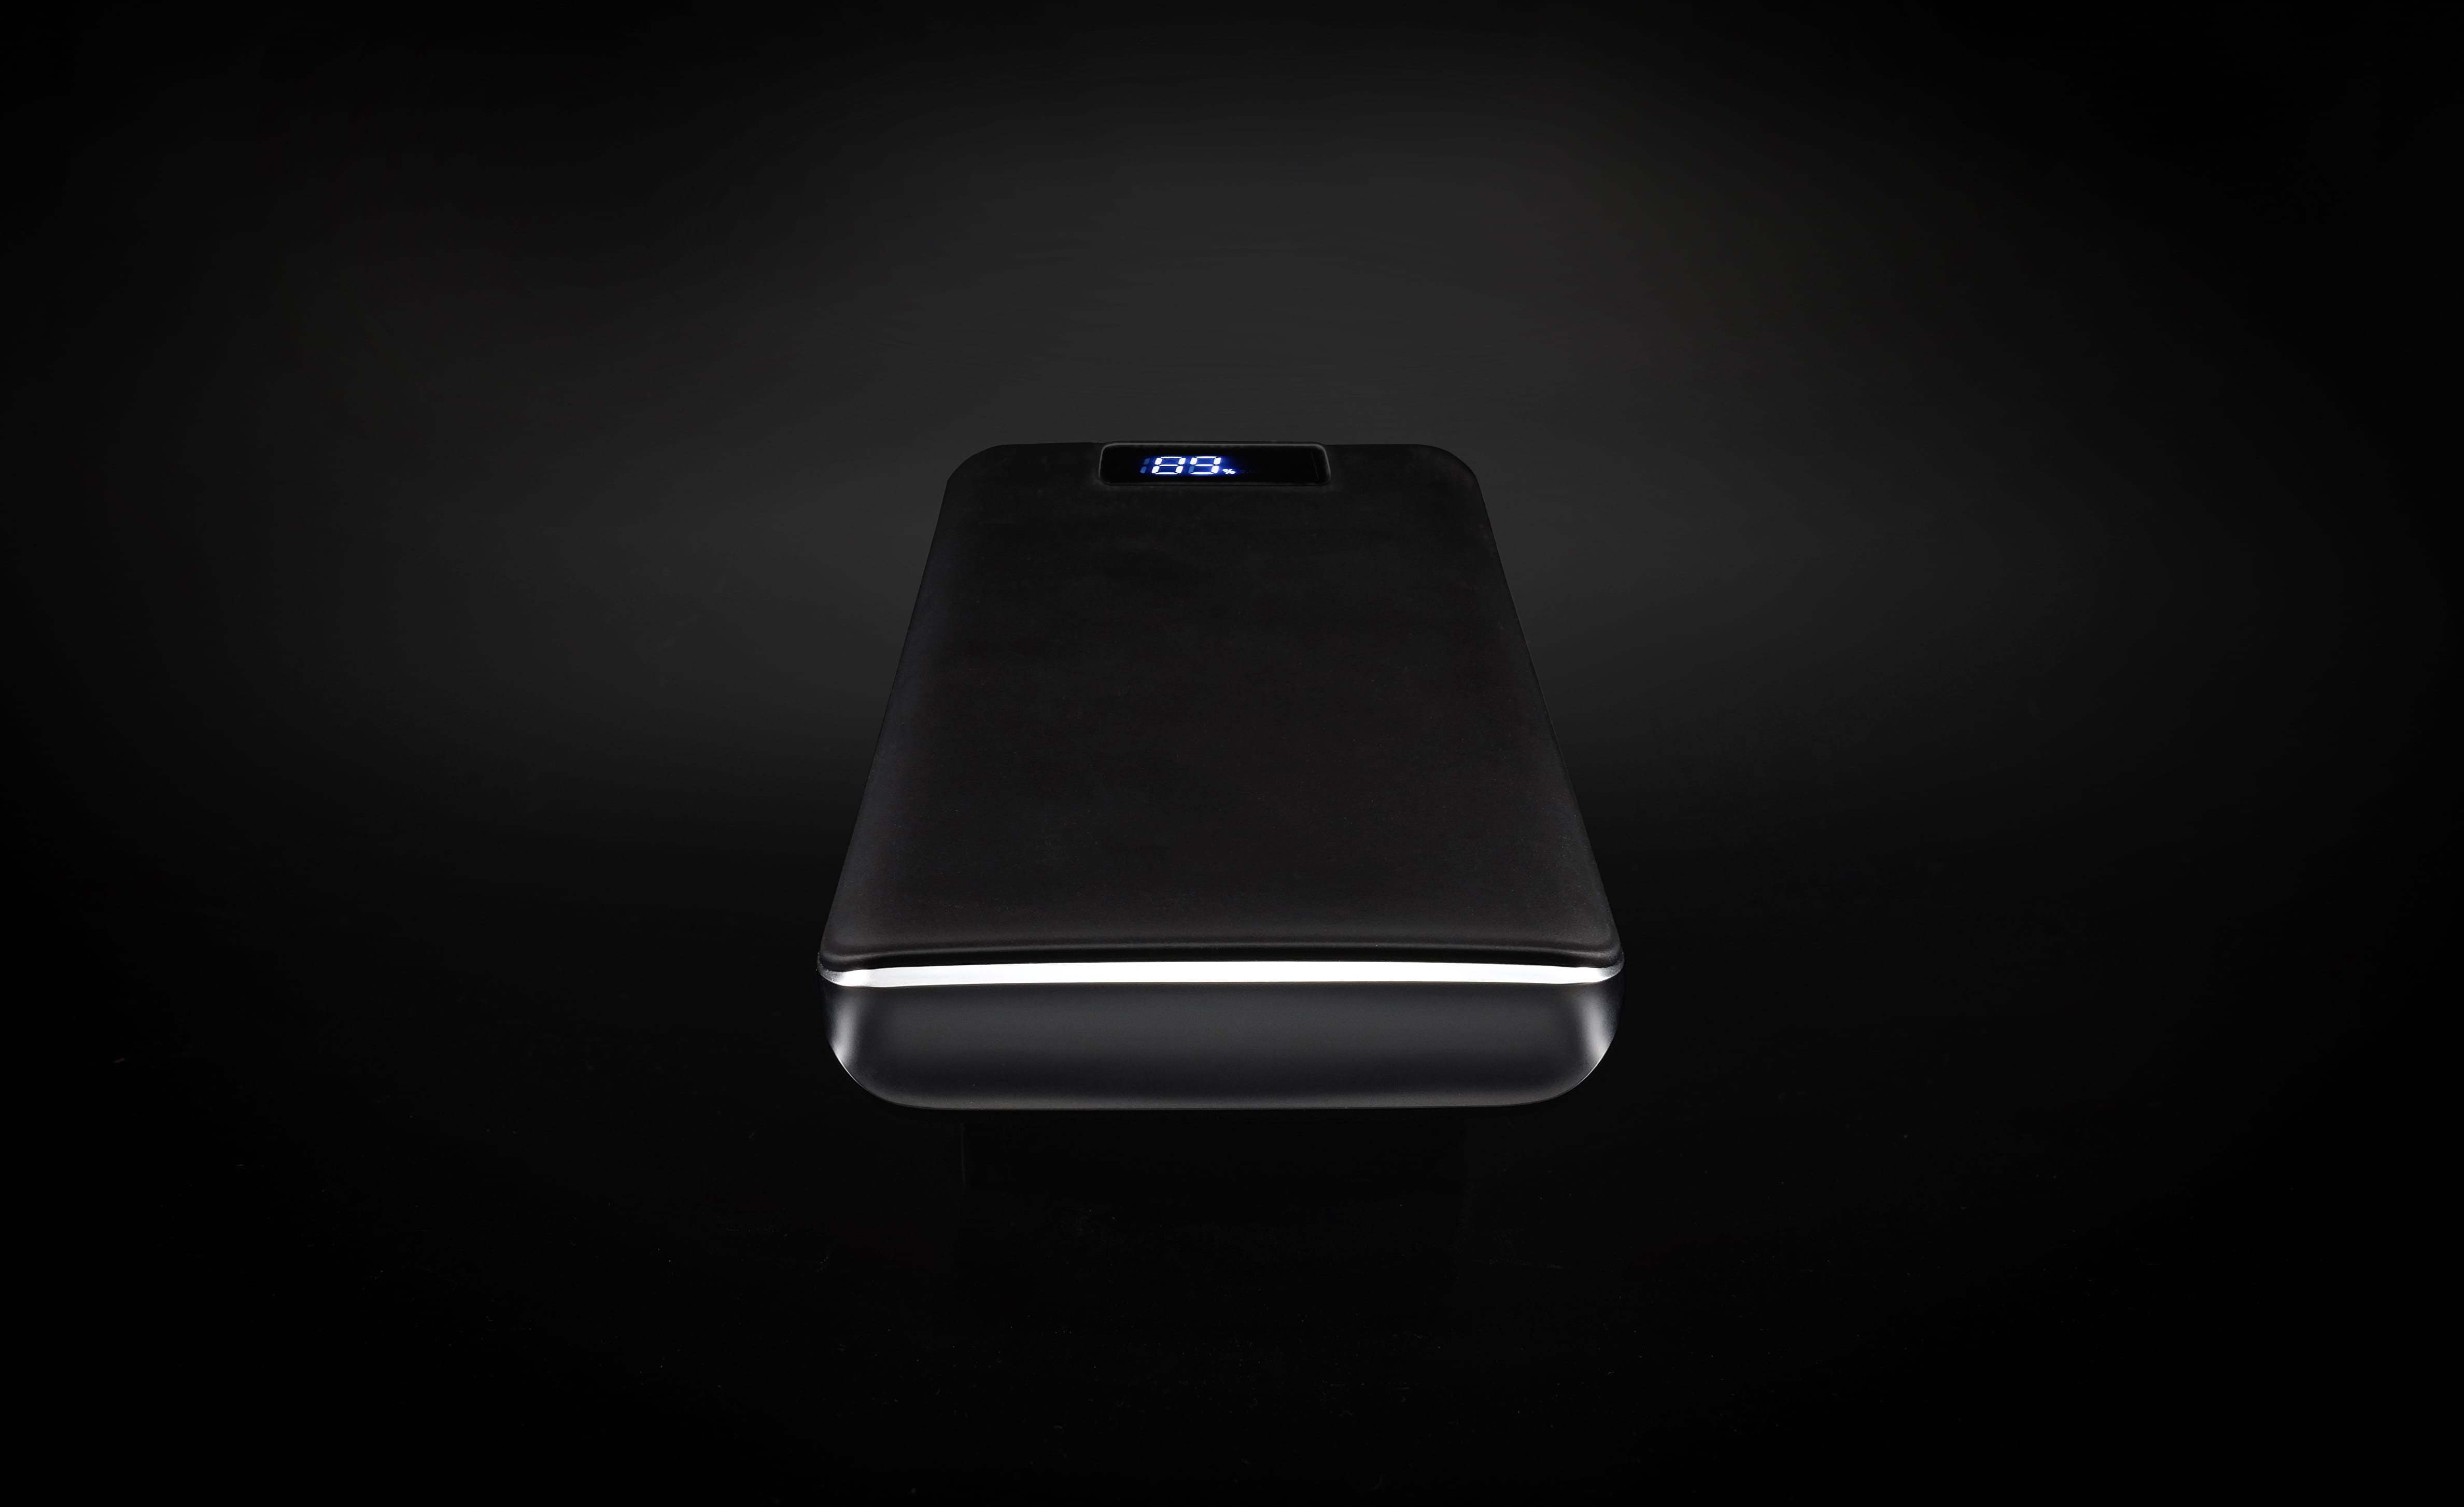 black power bank turned on, black power bank with black background